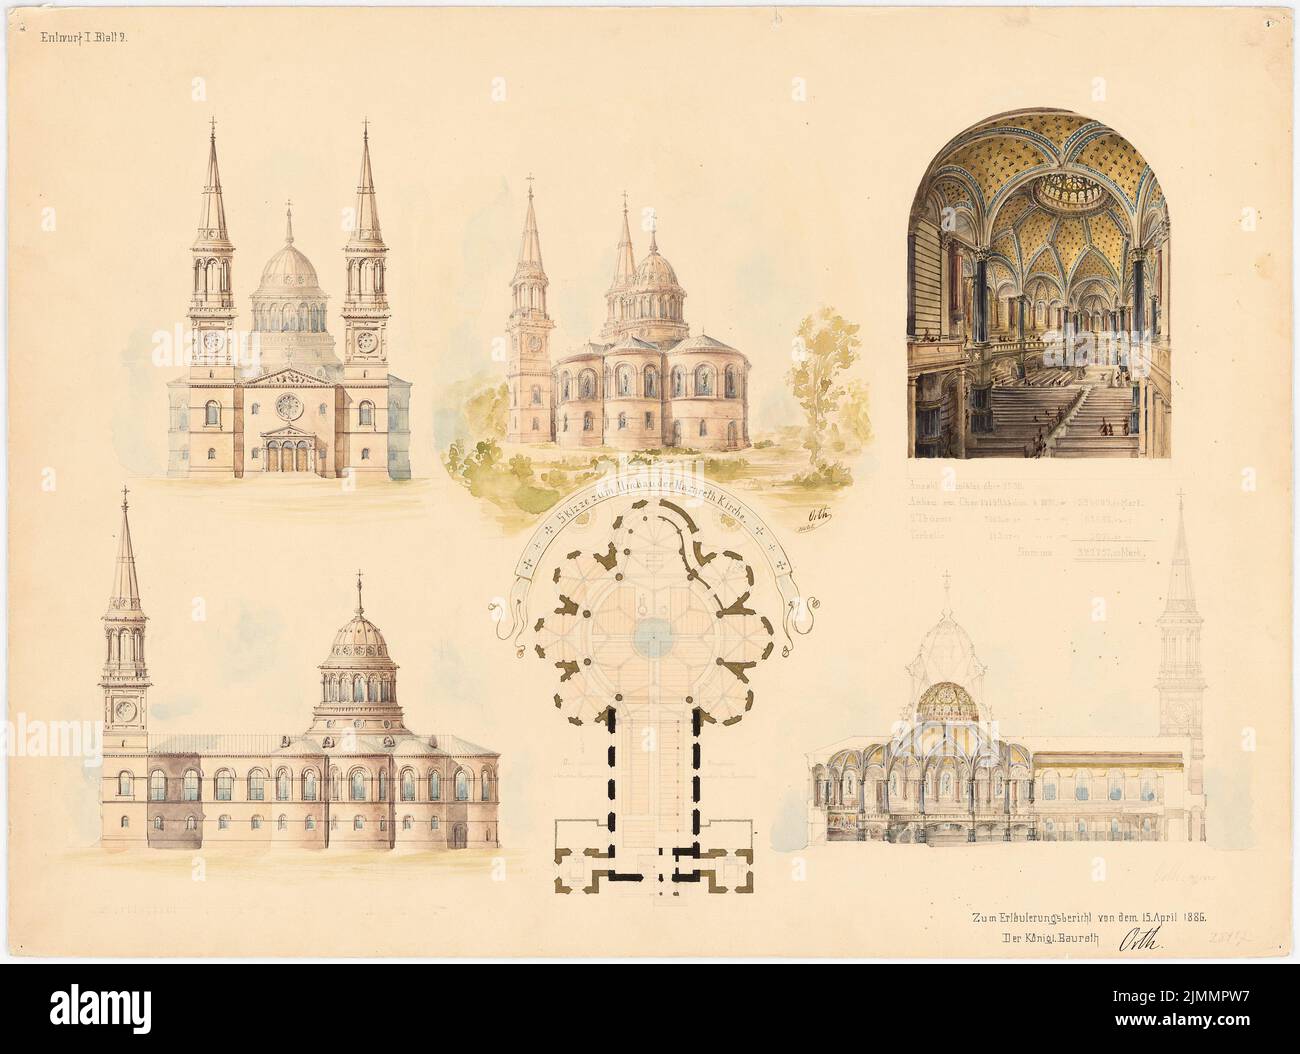 Orth August (1828-1901), Nazarethkirche (1835), Berlin-Wedding. Project I (conversion) (April 15, 1886): floor plan, views, cut, perspective interior view. Pencil watercolored, gold heighted on the cardboard, 48 x 64.7 cm (including scan edges) Stock Photo